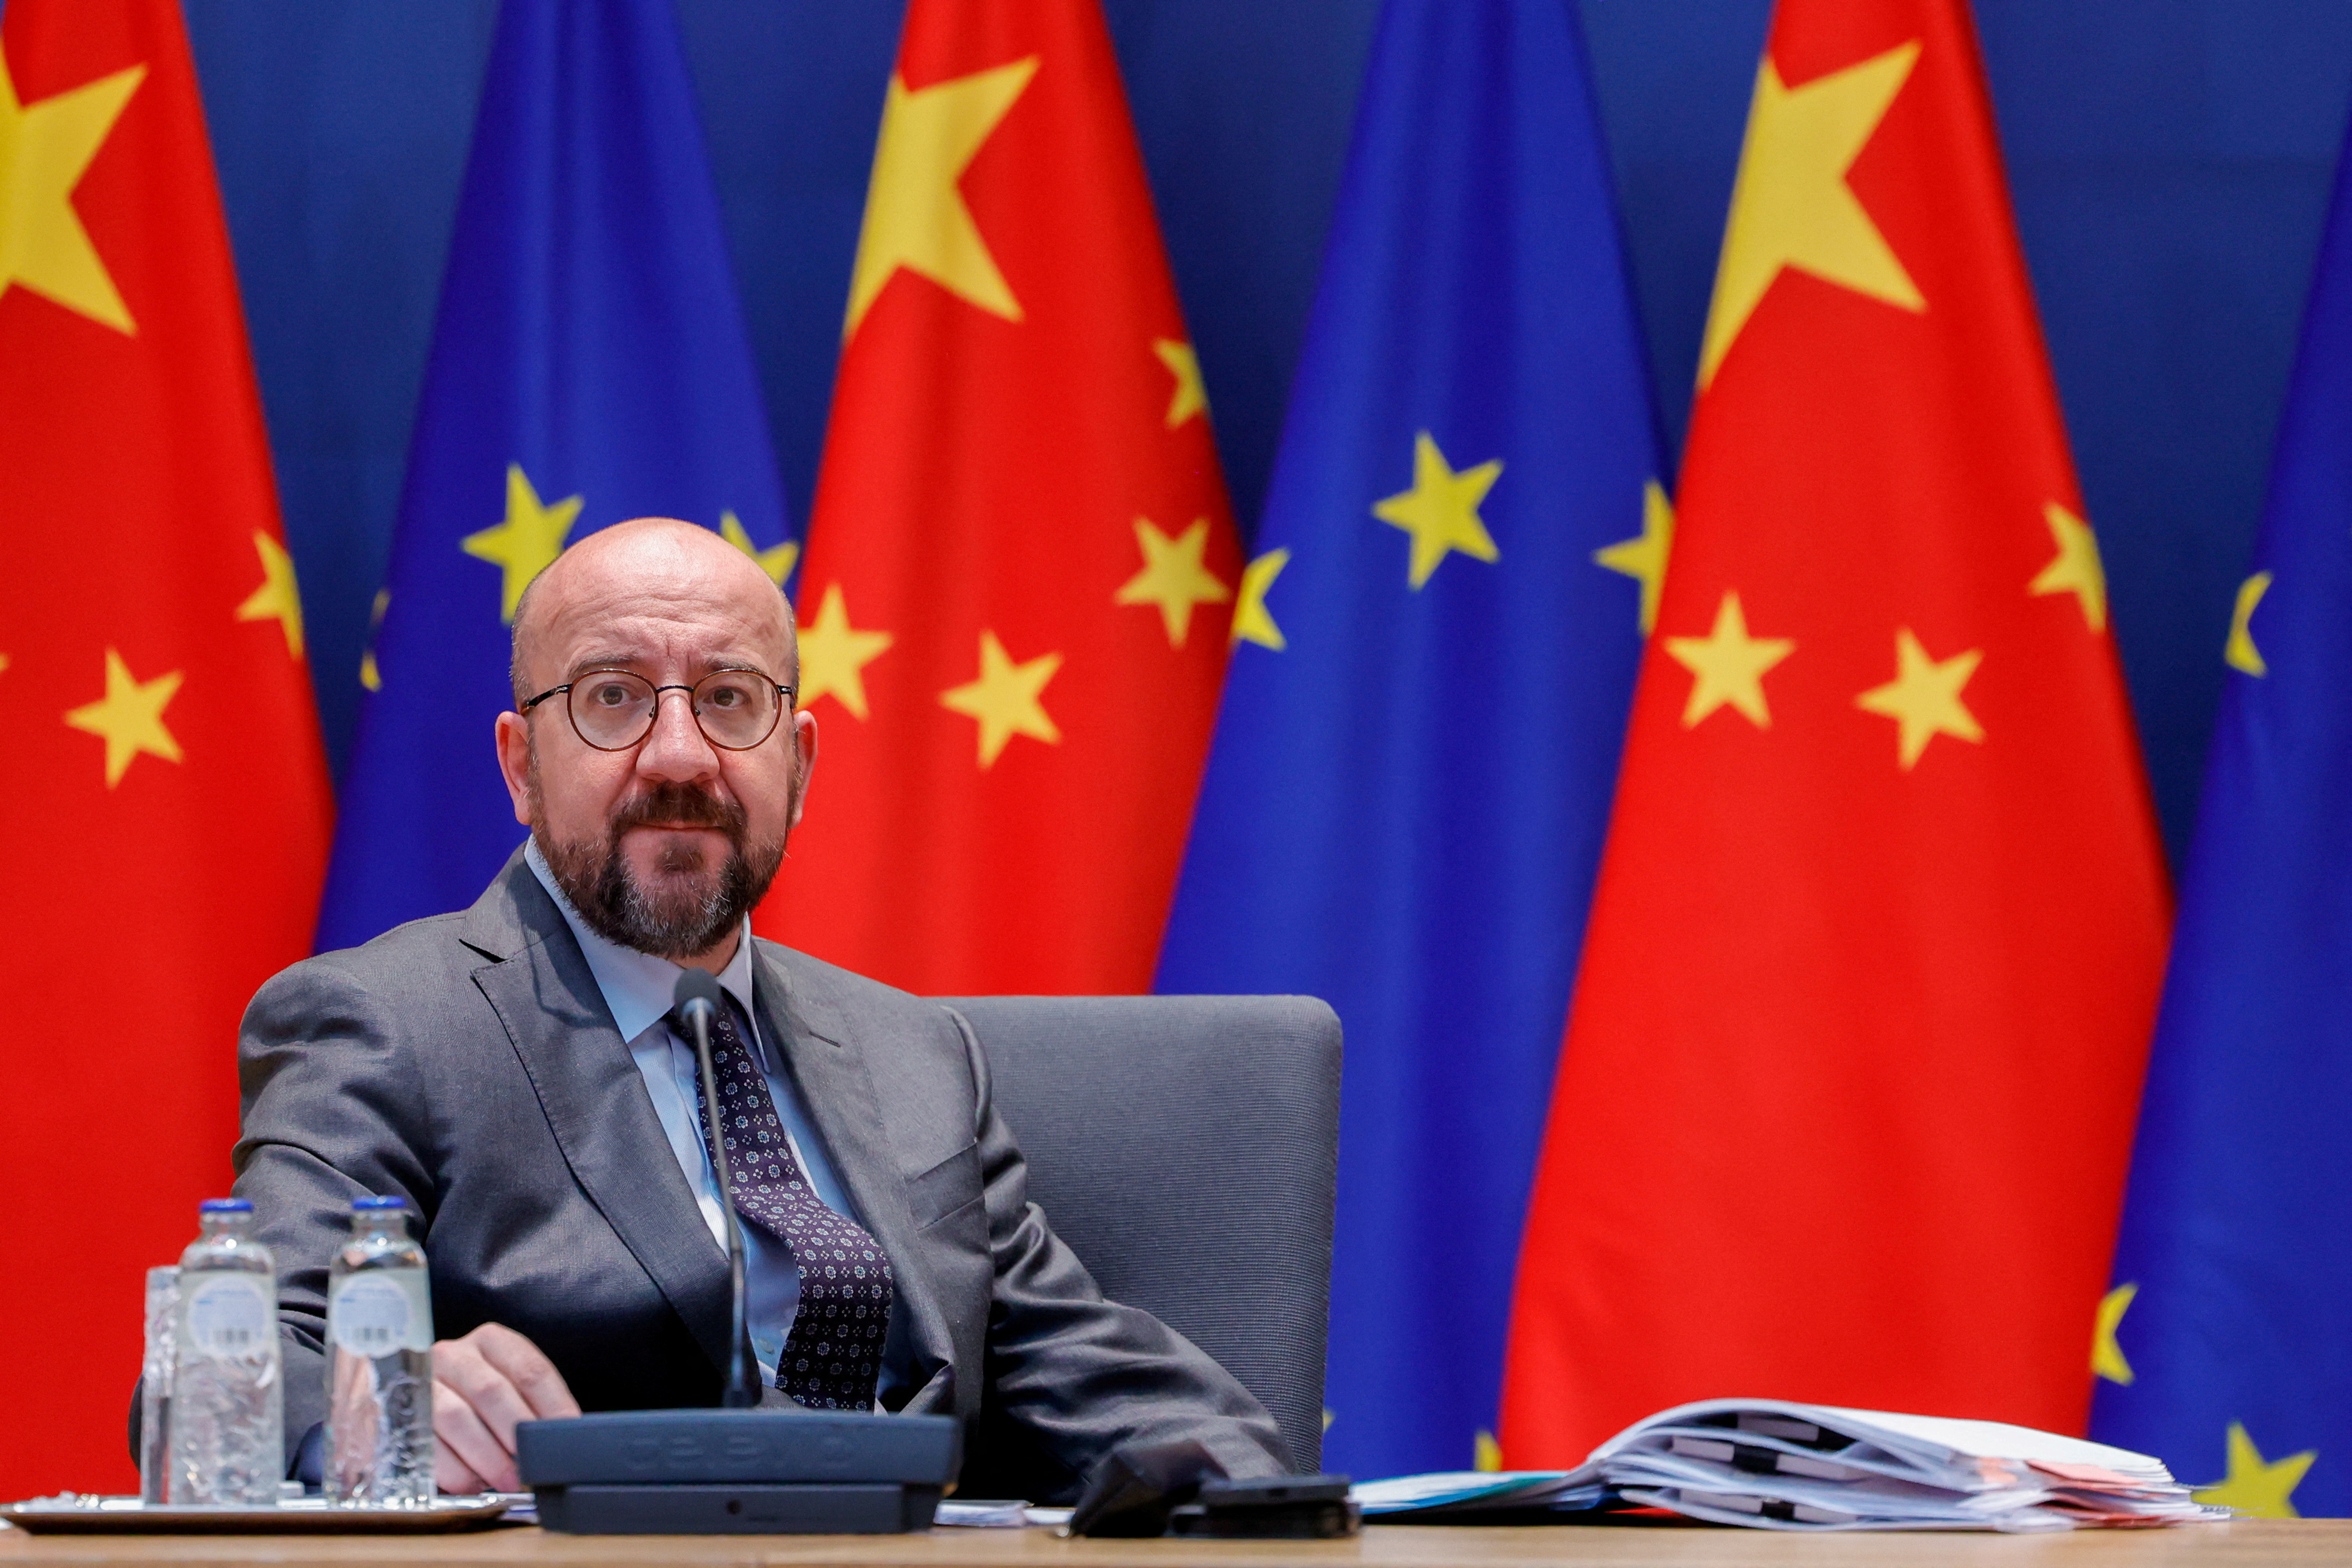 Virtual summit between the EU and China in Brussels